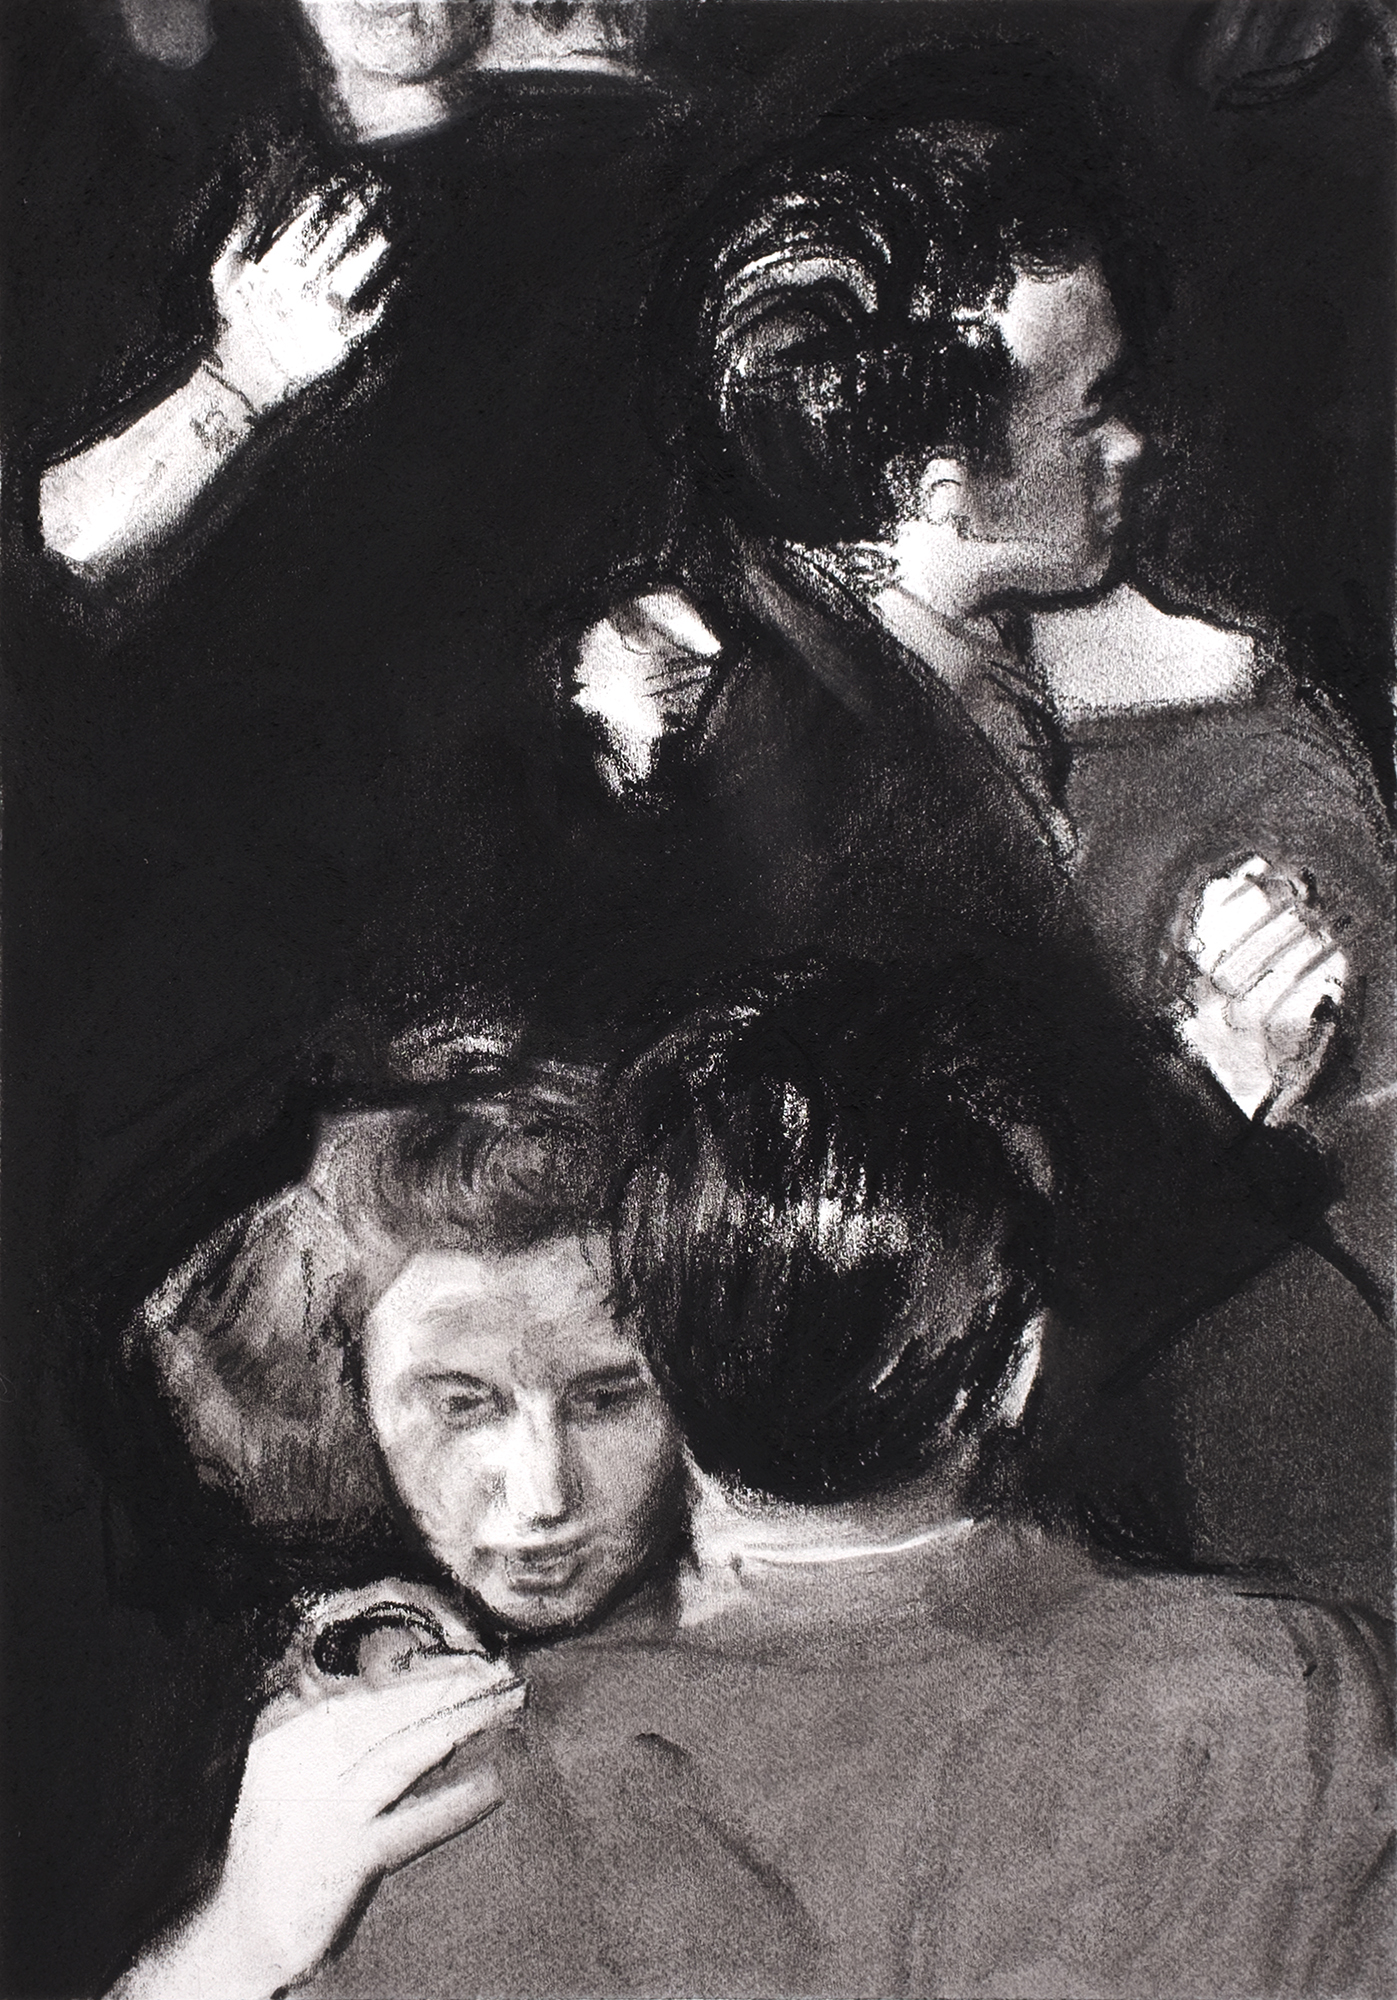 'Finish The Dance', Anthony Harvey, Charcoal on paper, 20.3 x 28 cm